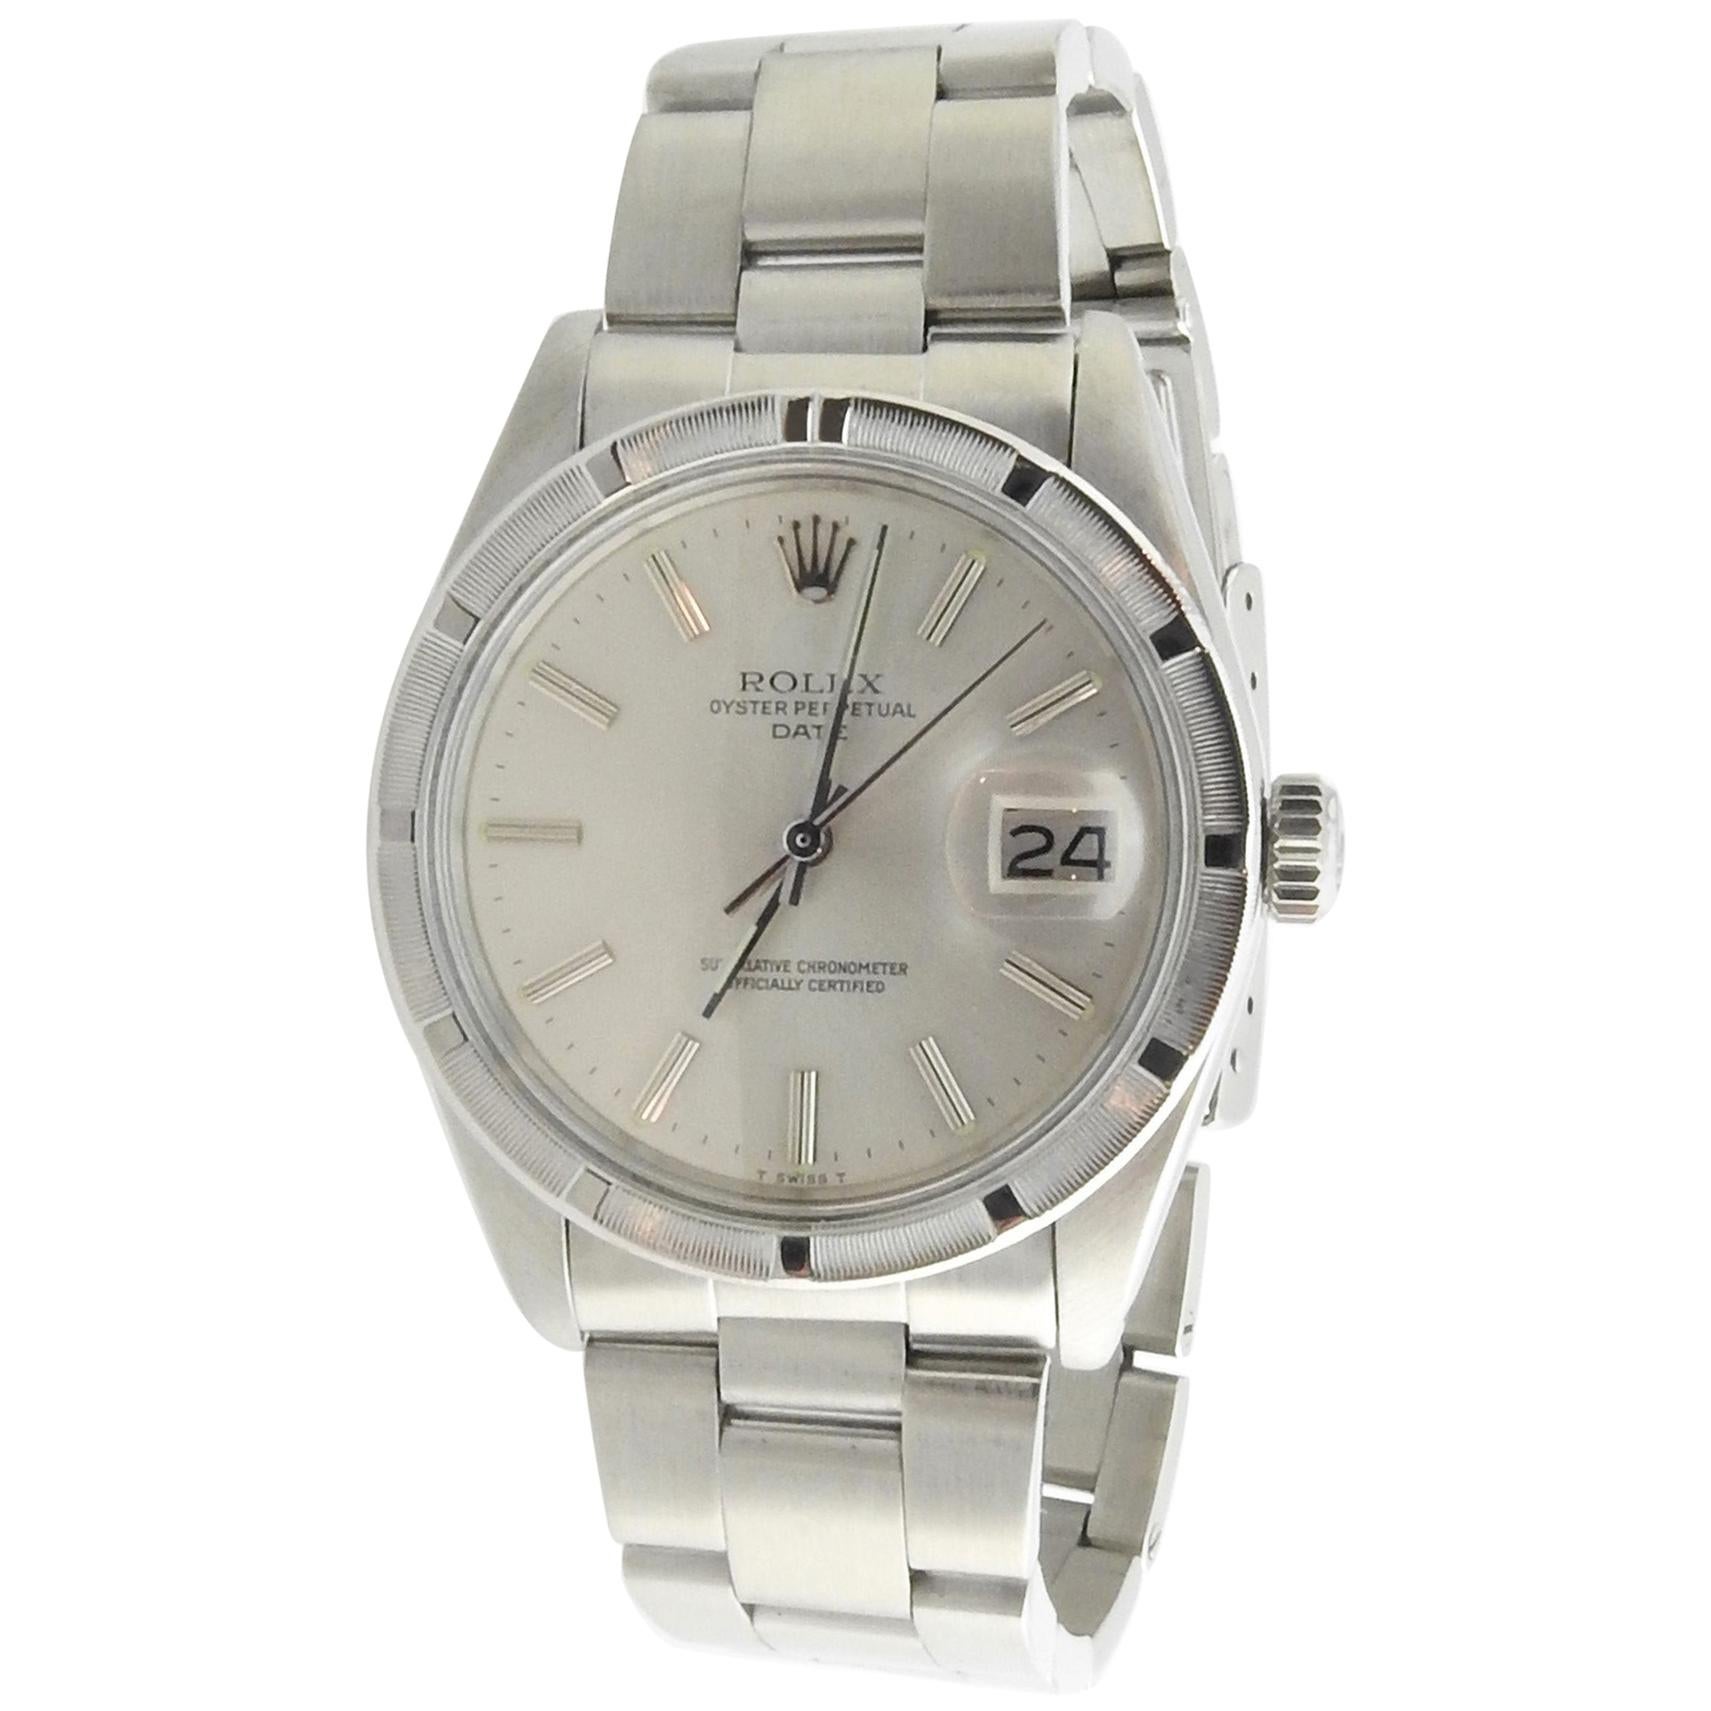 1980 Men's Rolex Thunderbird Stainless Steel Automatic Watch Silver Dial